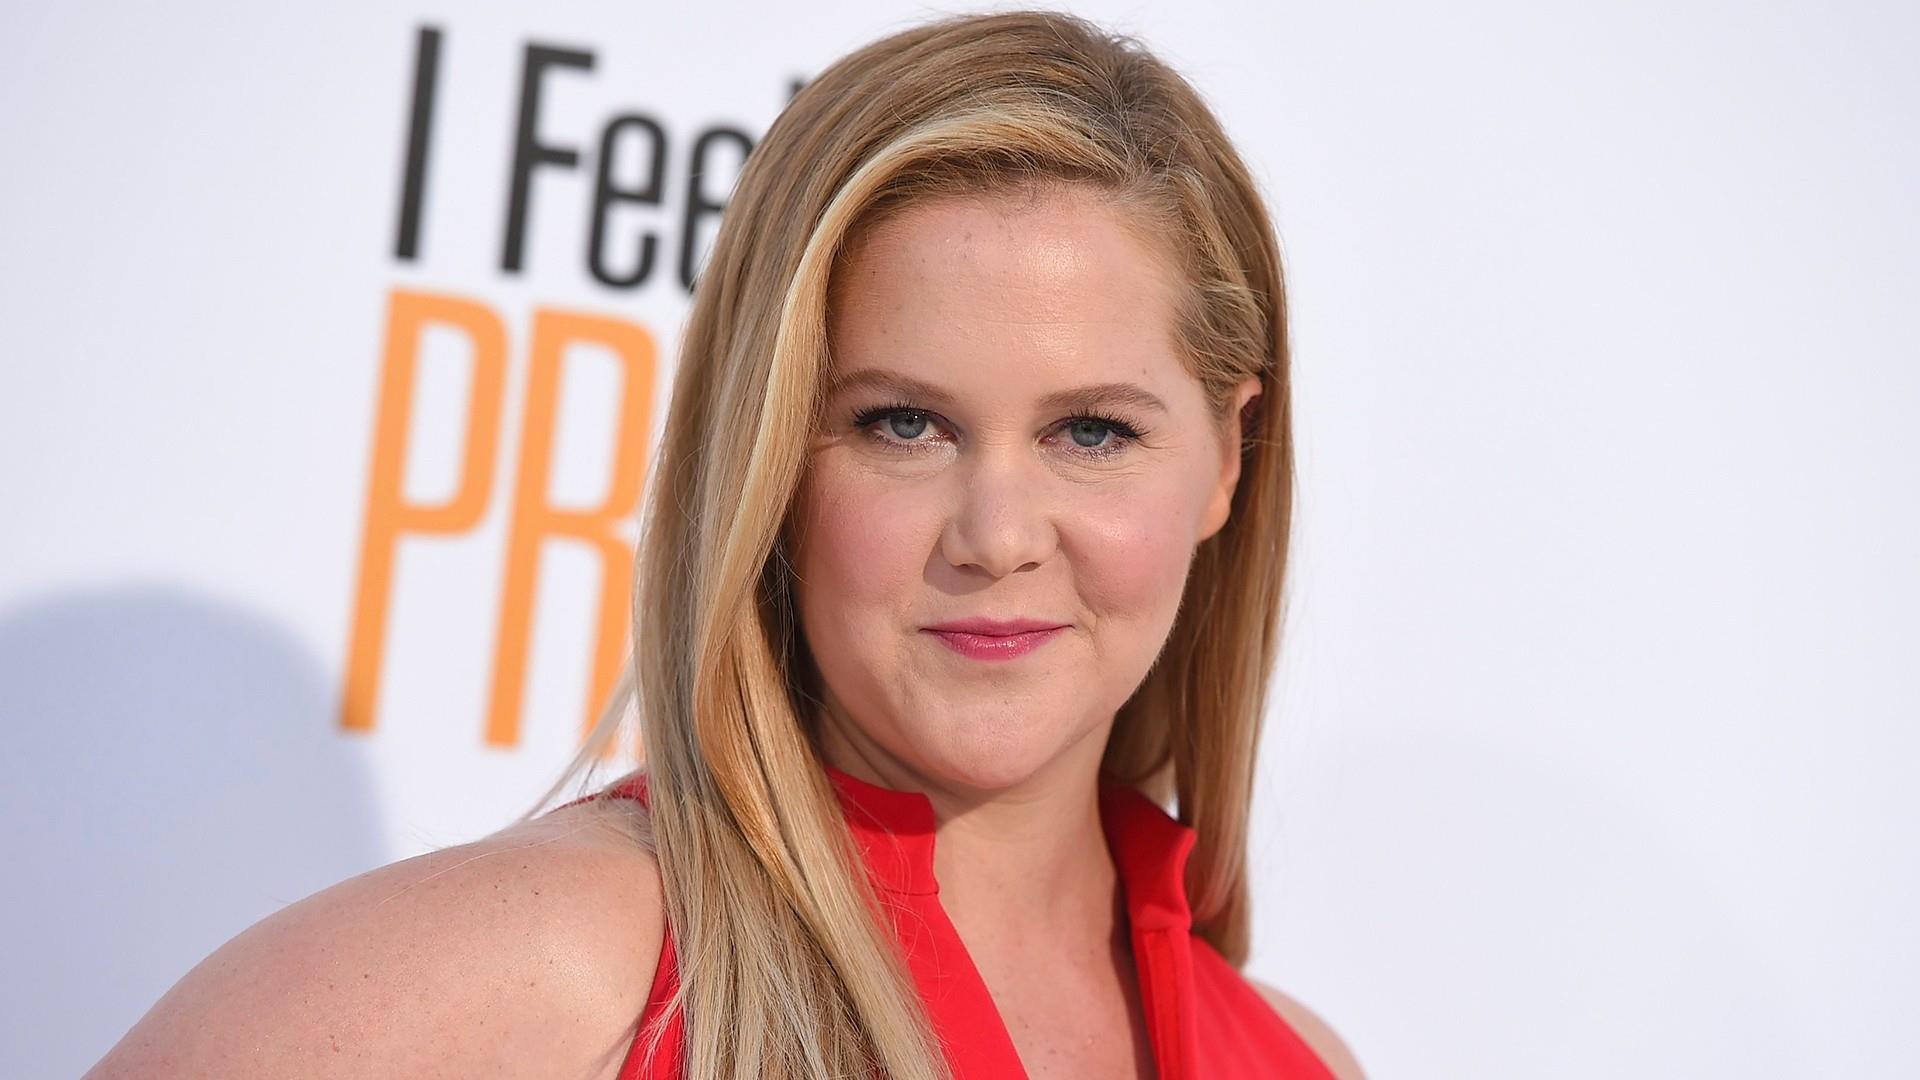 Amy Schumer pregnant with 1st child